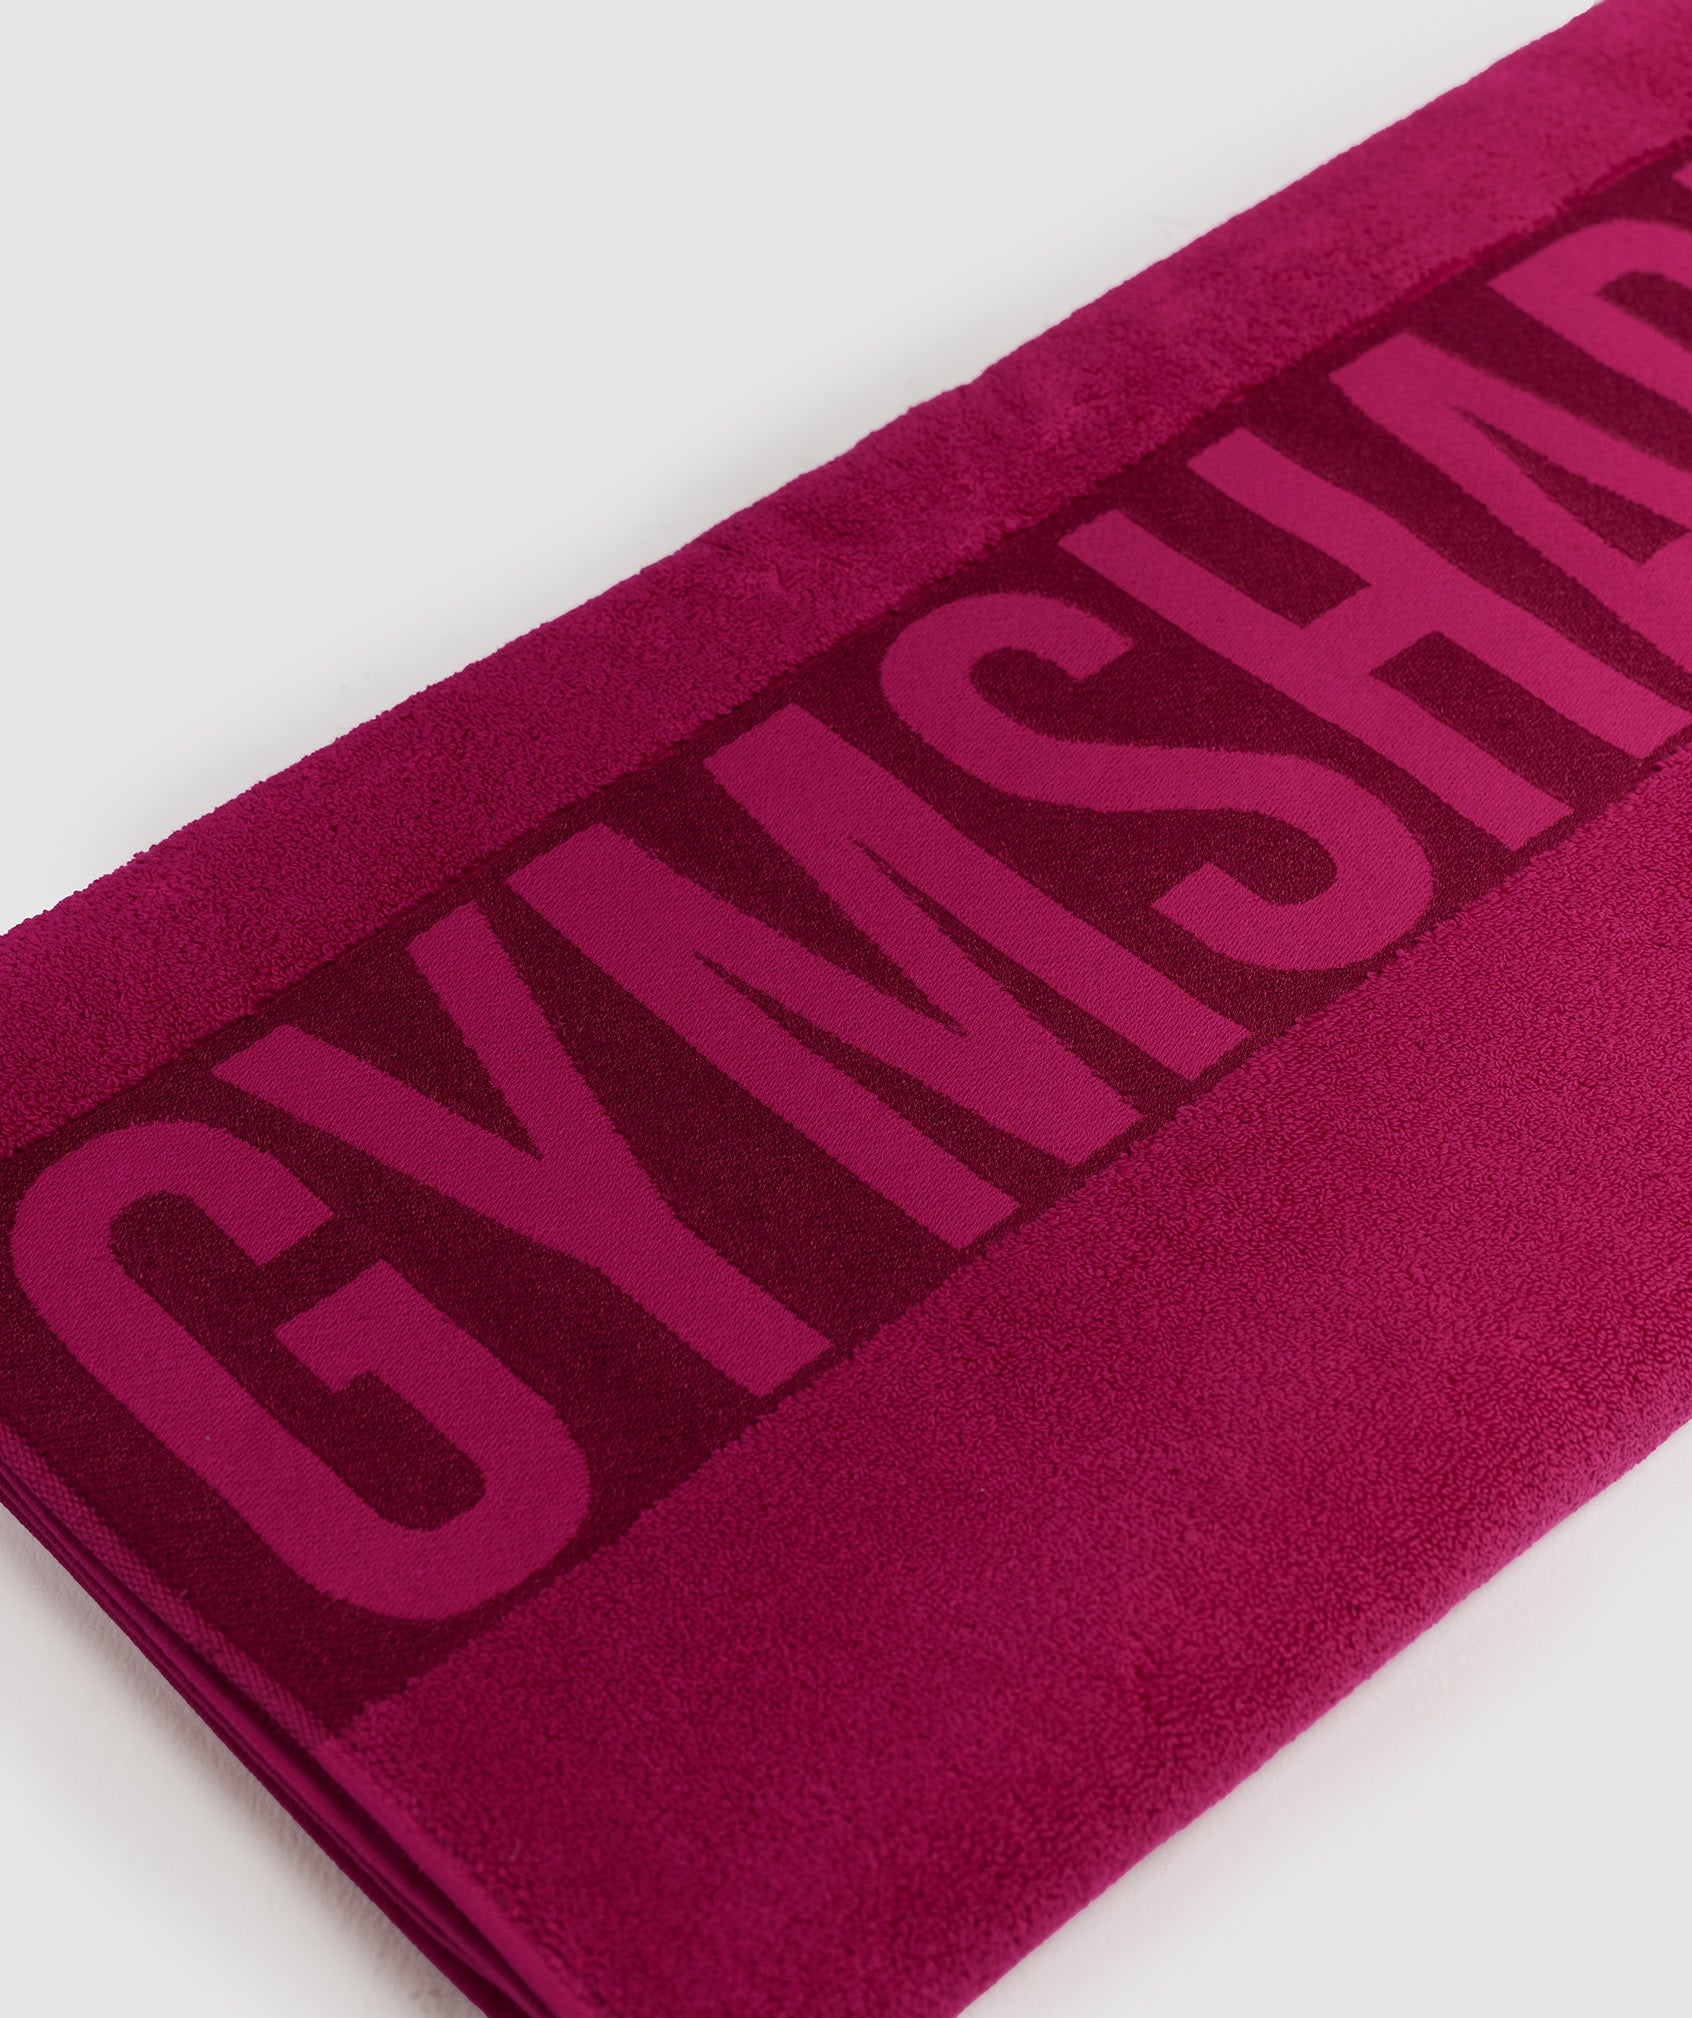 Towel in Bold Magenta/Raspberry Pink - view 2